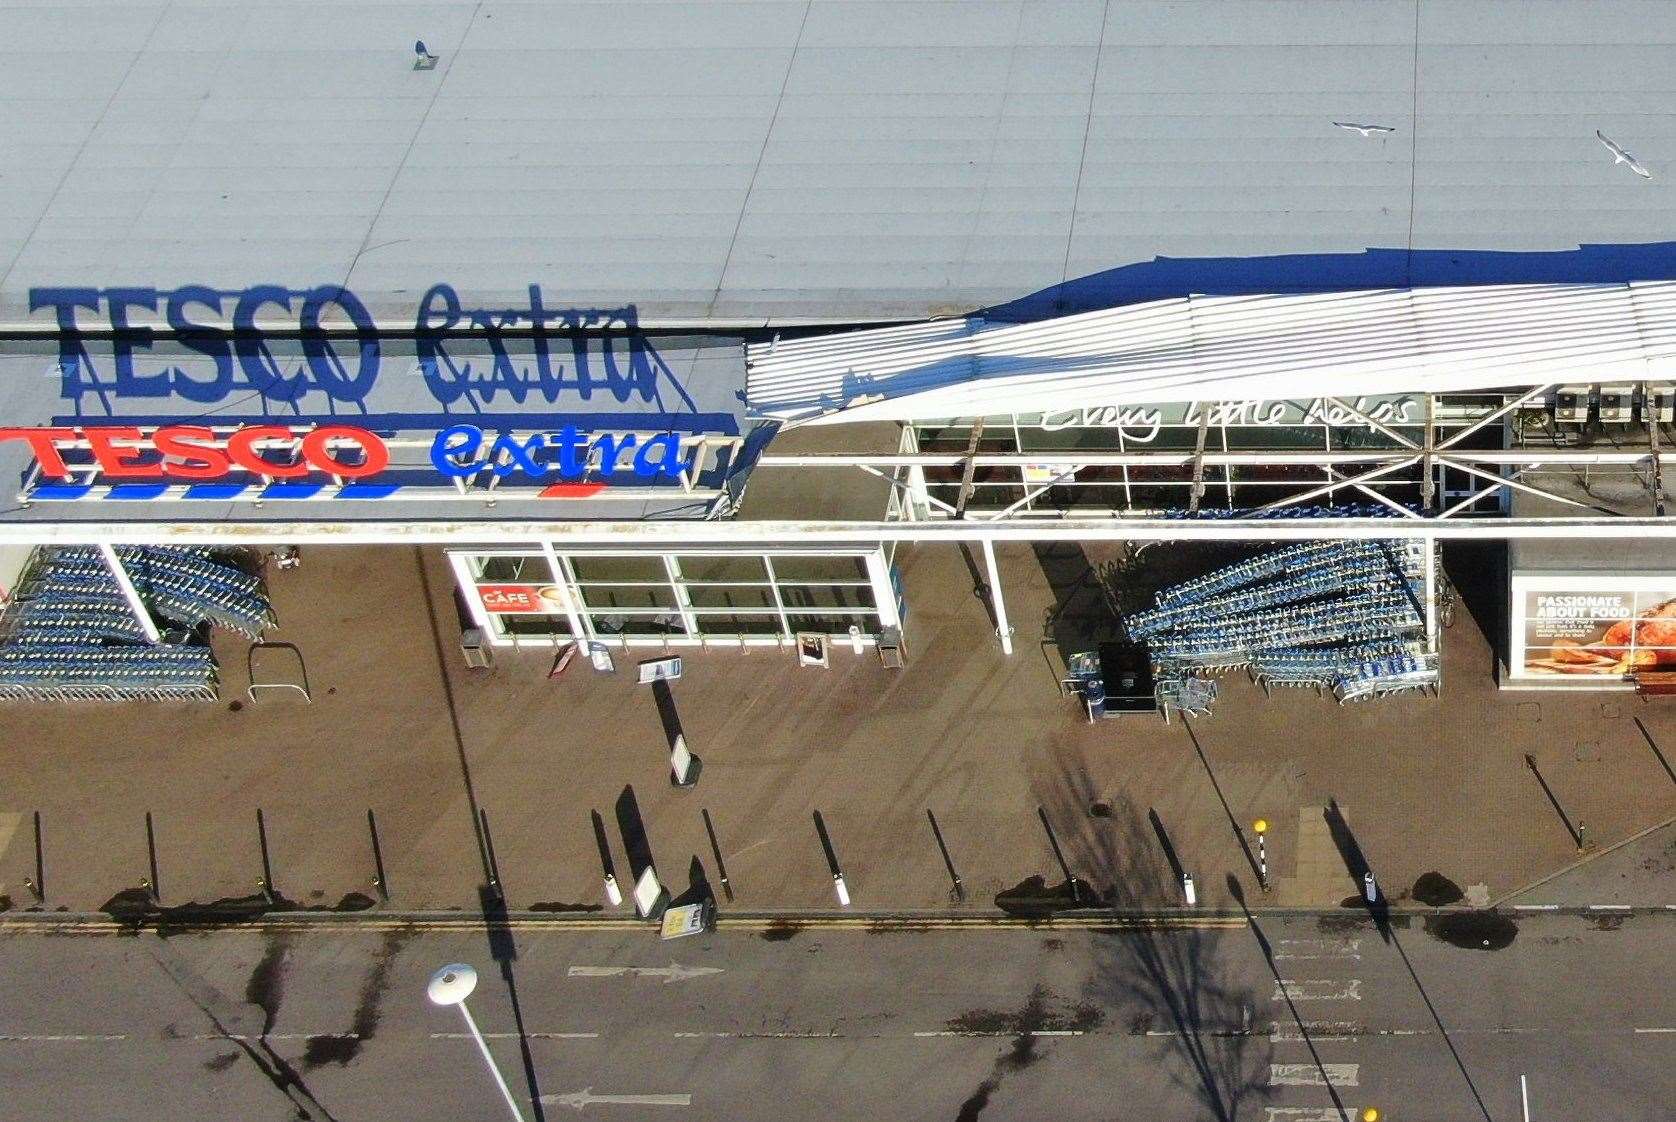 Damage to the Tesco store in Margate Road, Broadstairs. Pic: Swift Aerial Photography (7691602)